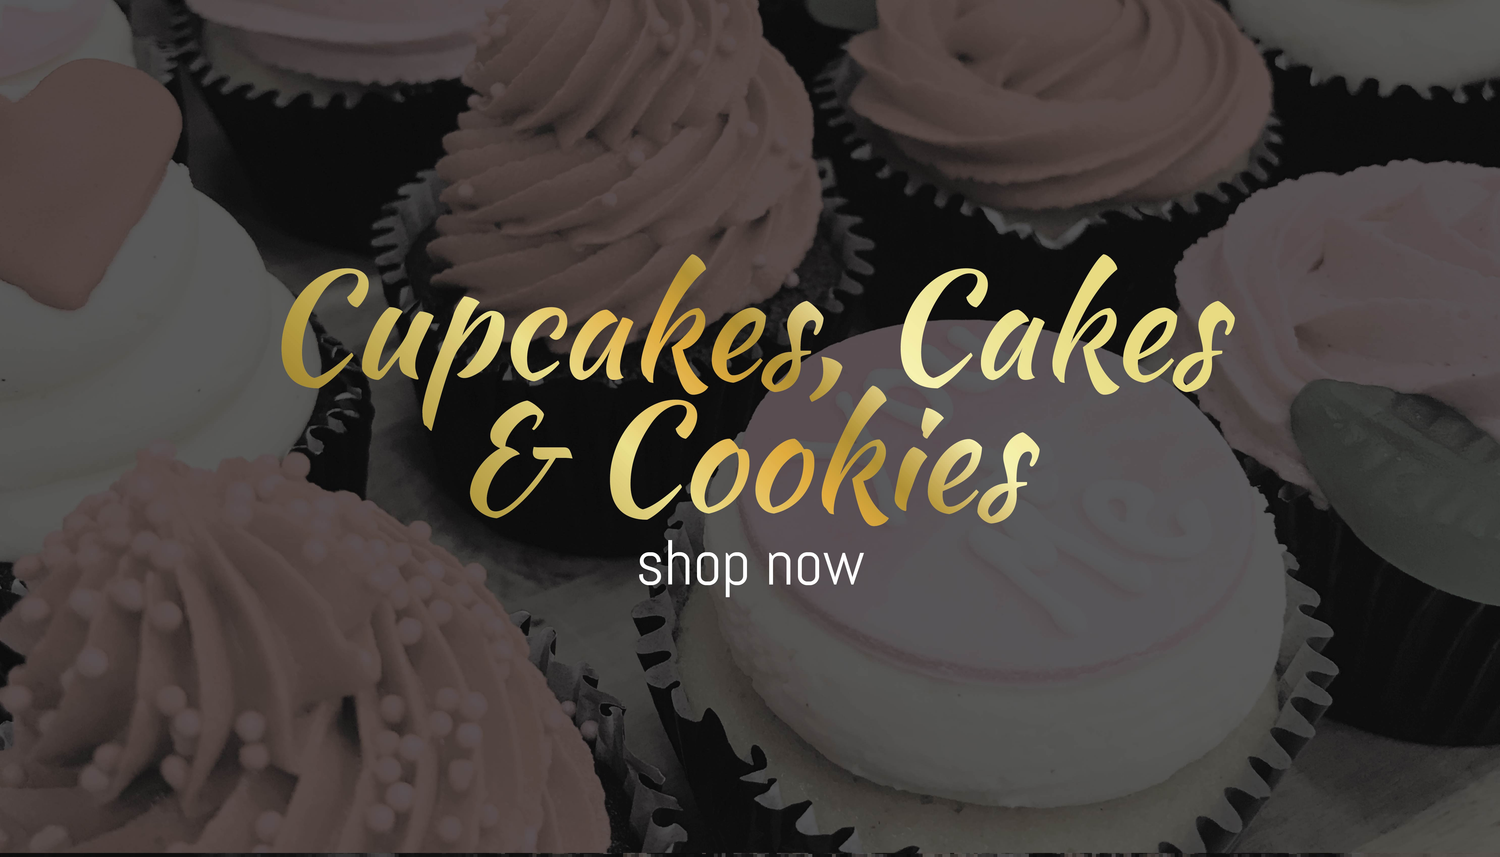 Cupcakes, Cakes and Cookies